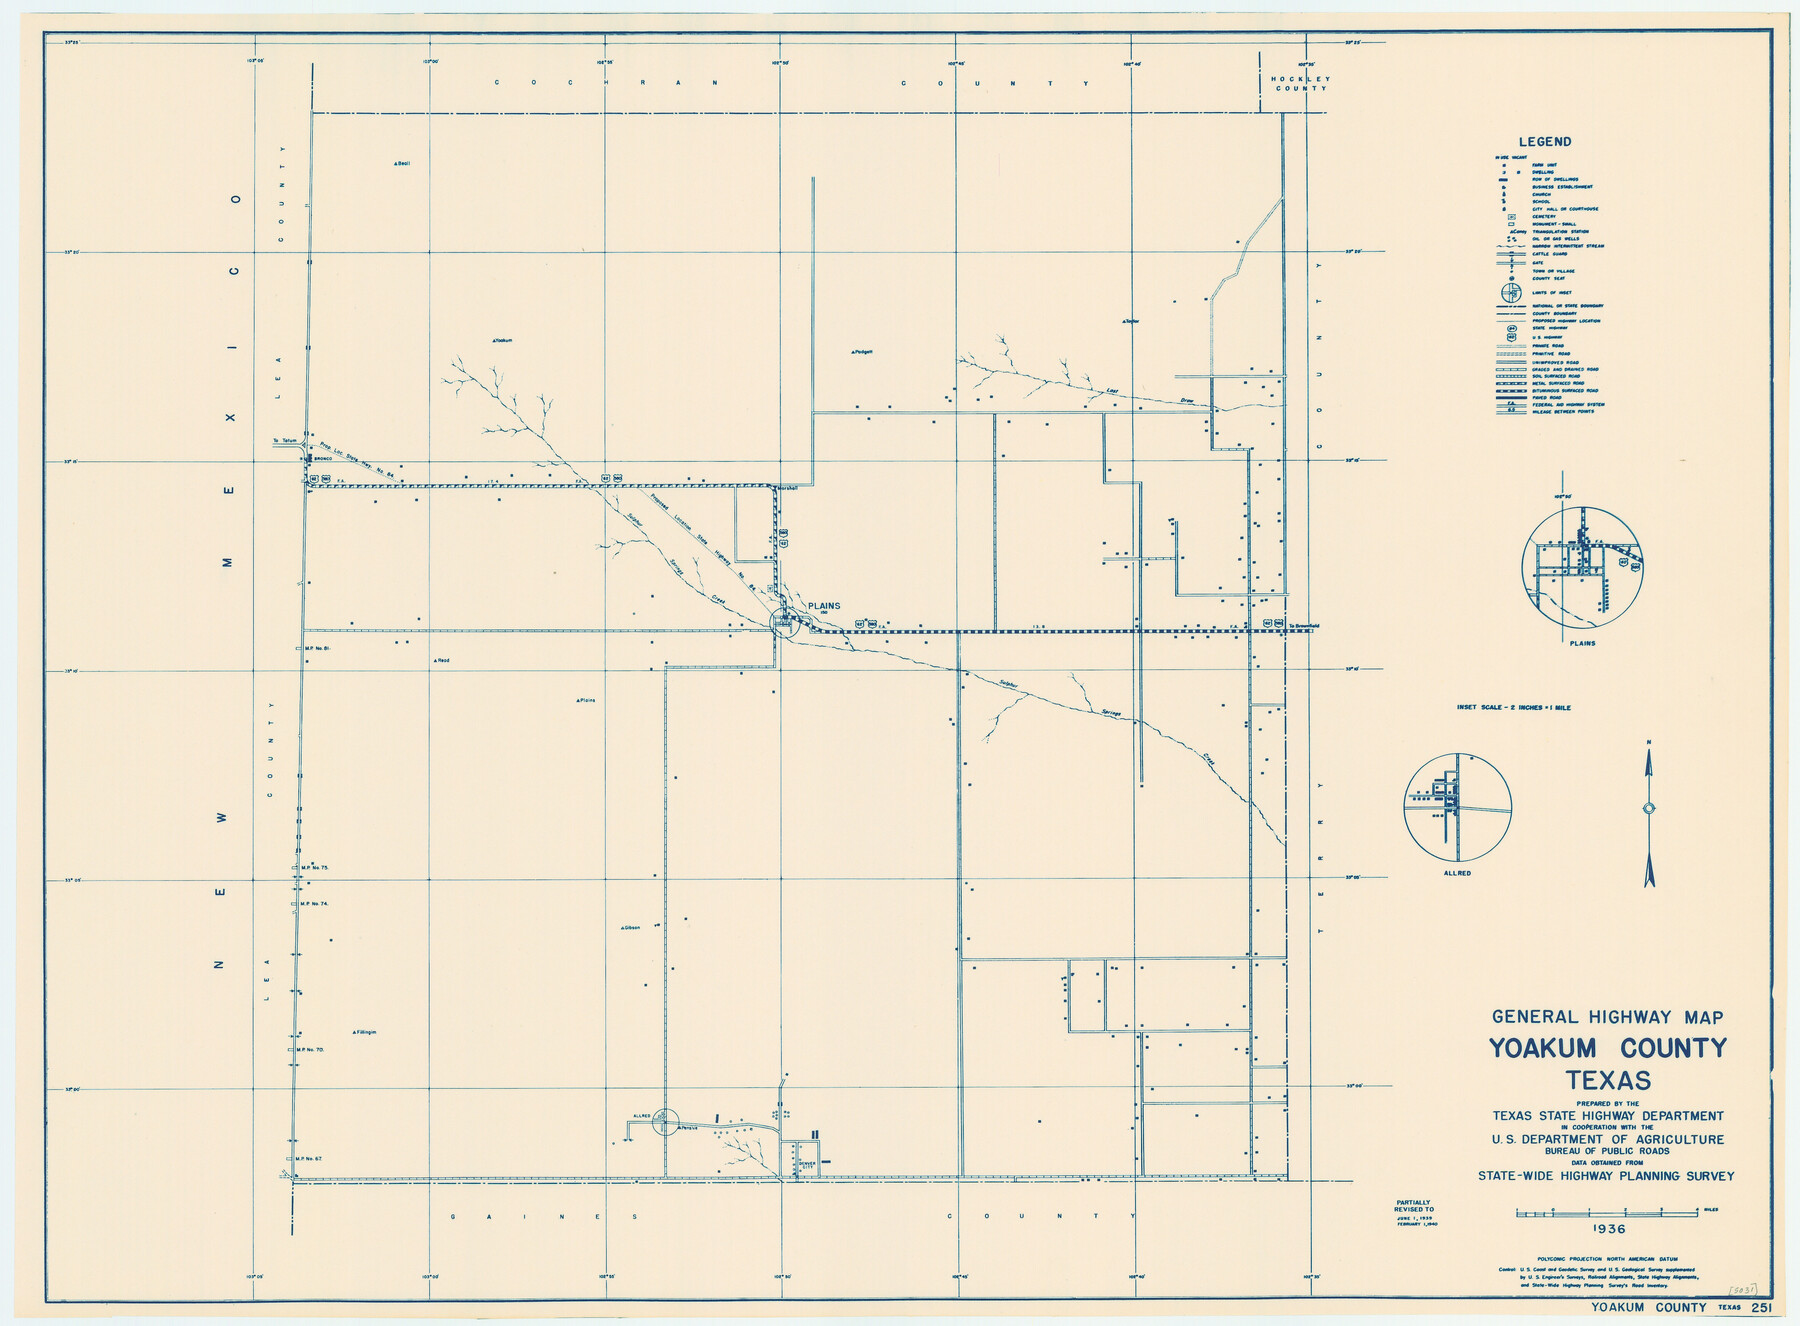 79285, General Highway Map, Yoakum County, Texas, Texas State Library and Archives